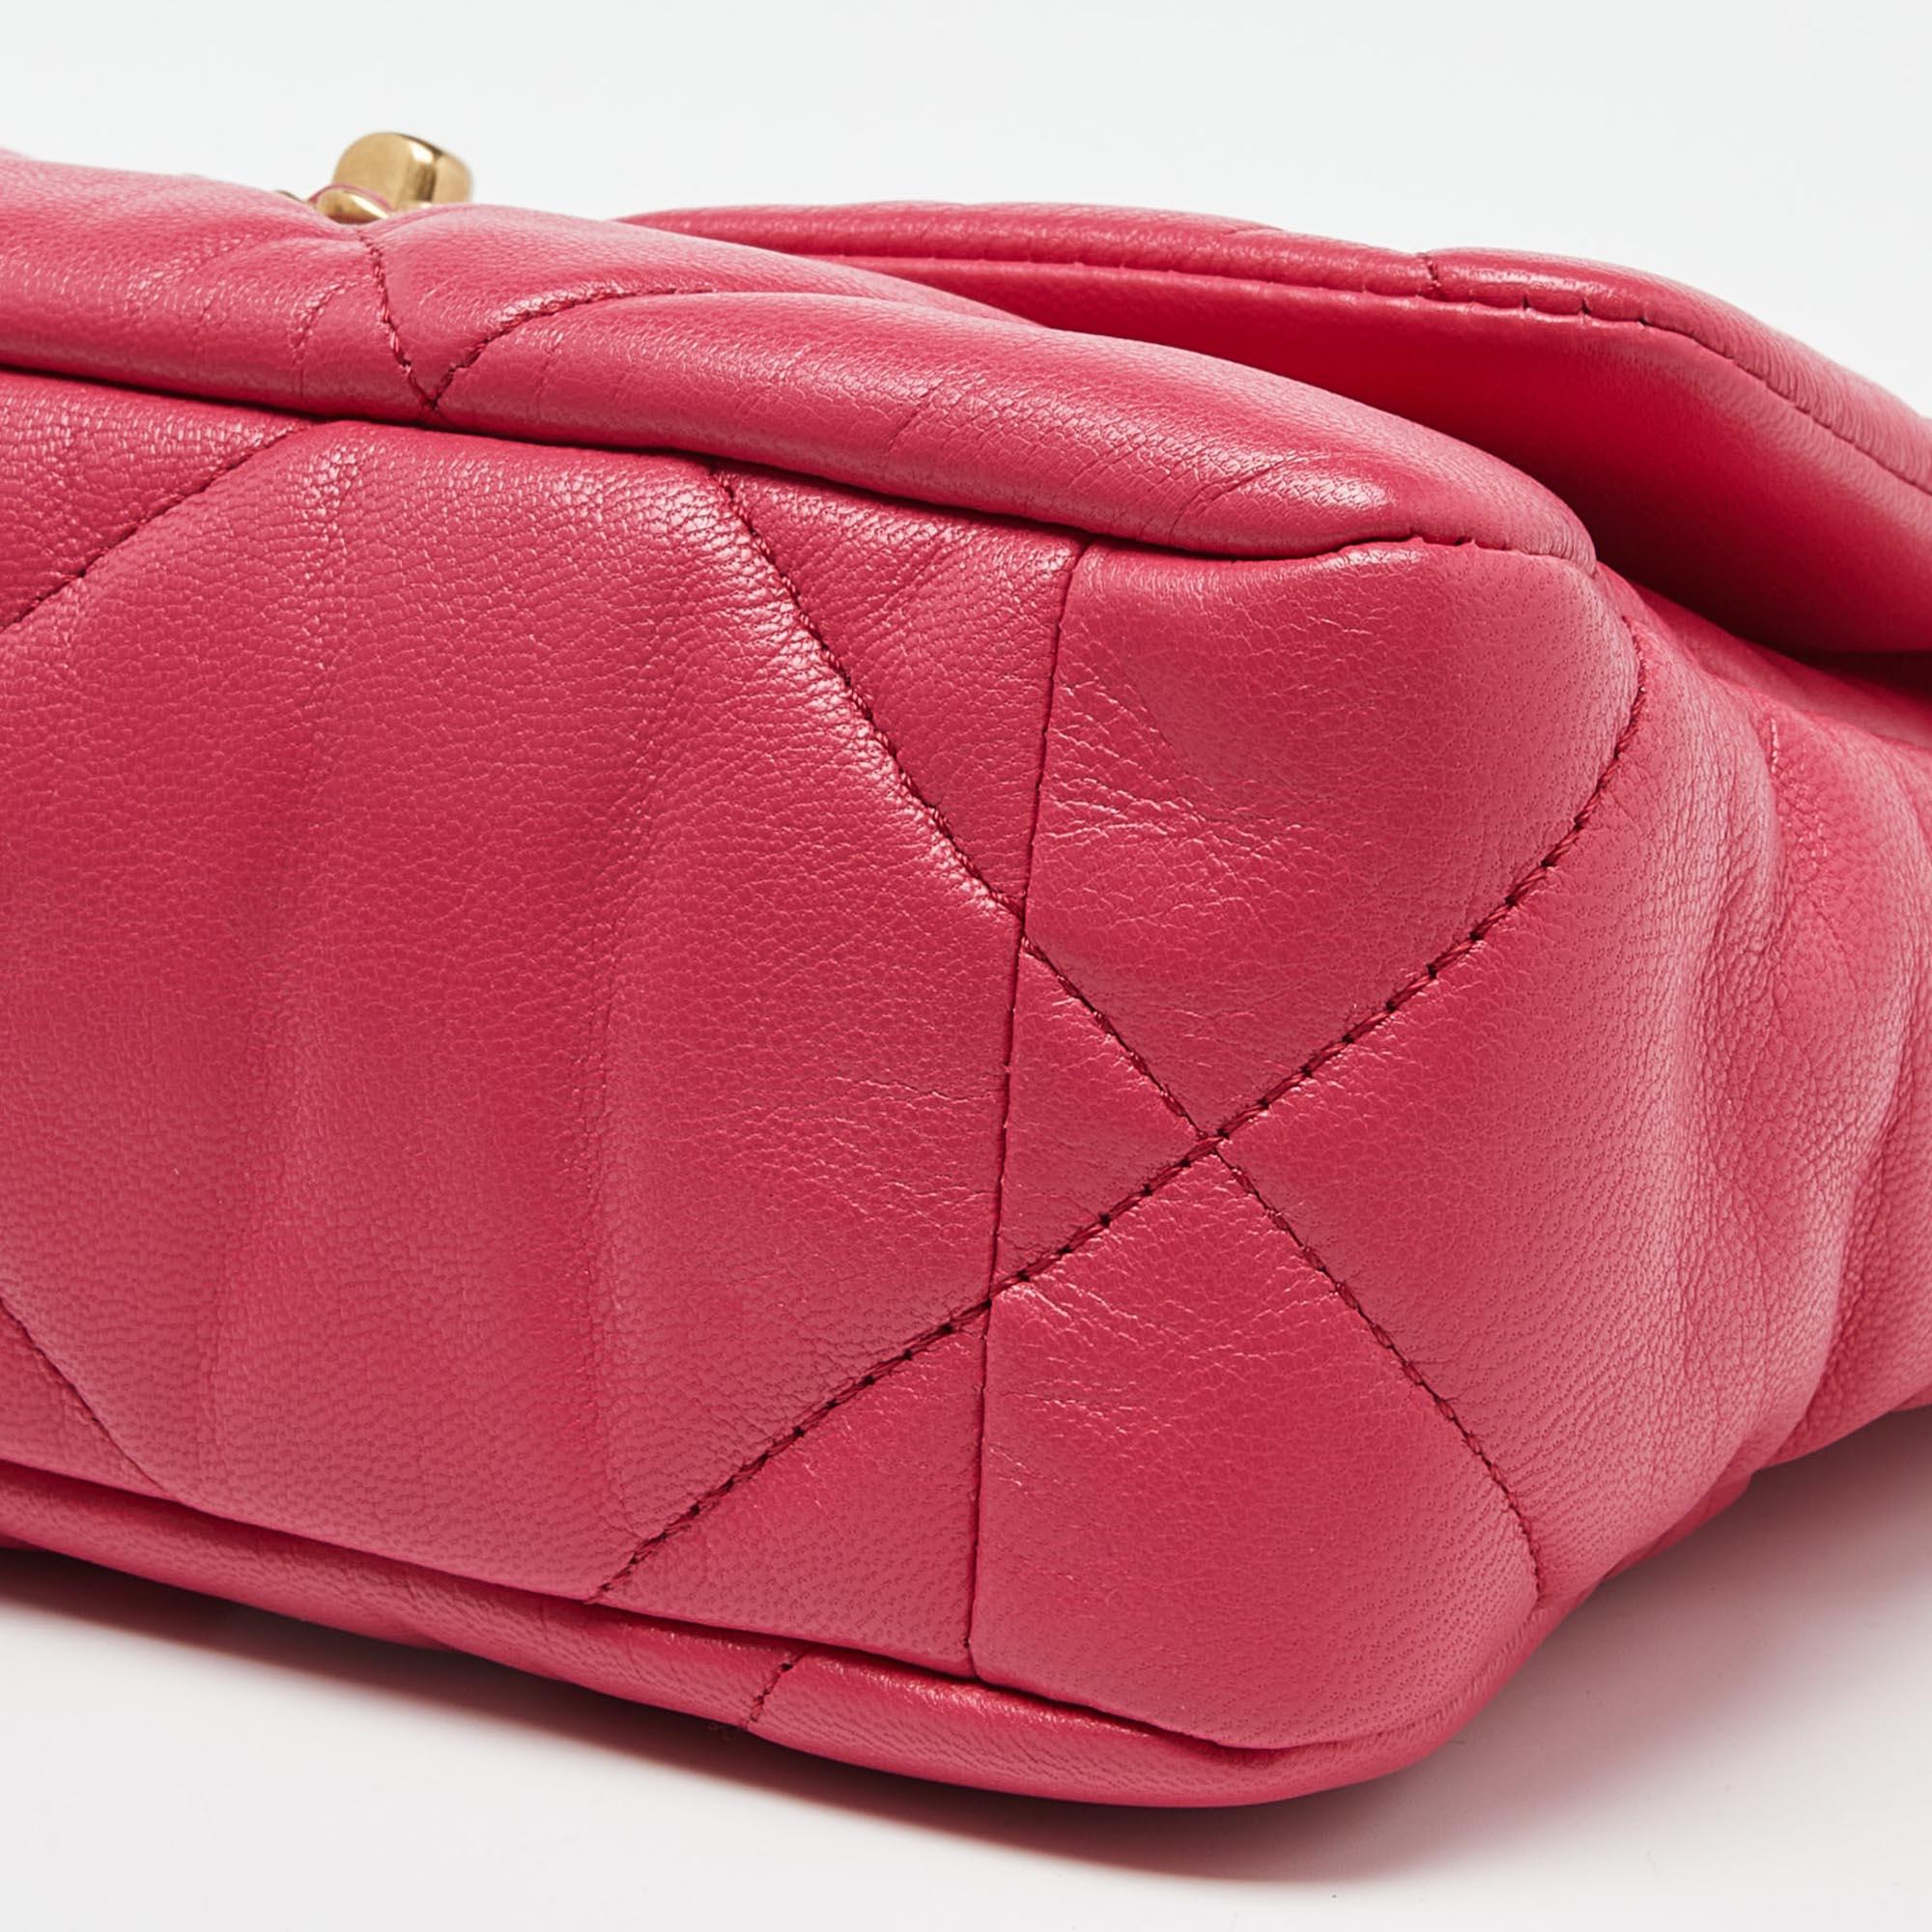 Chanel Pink Quilted Leather Medium 19 Flap Top Handle Bag For Sale 3